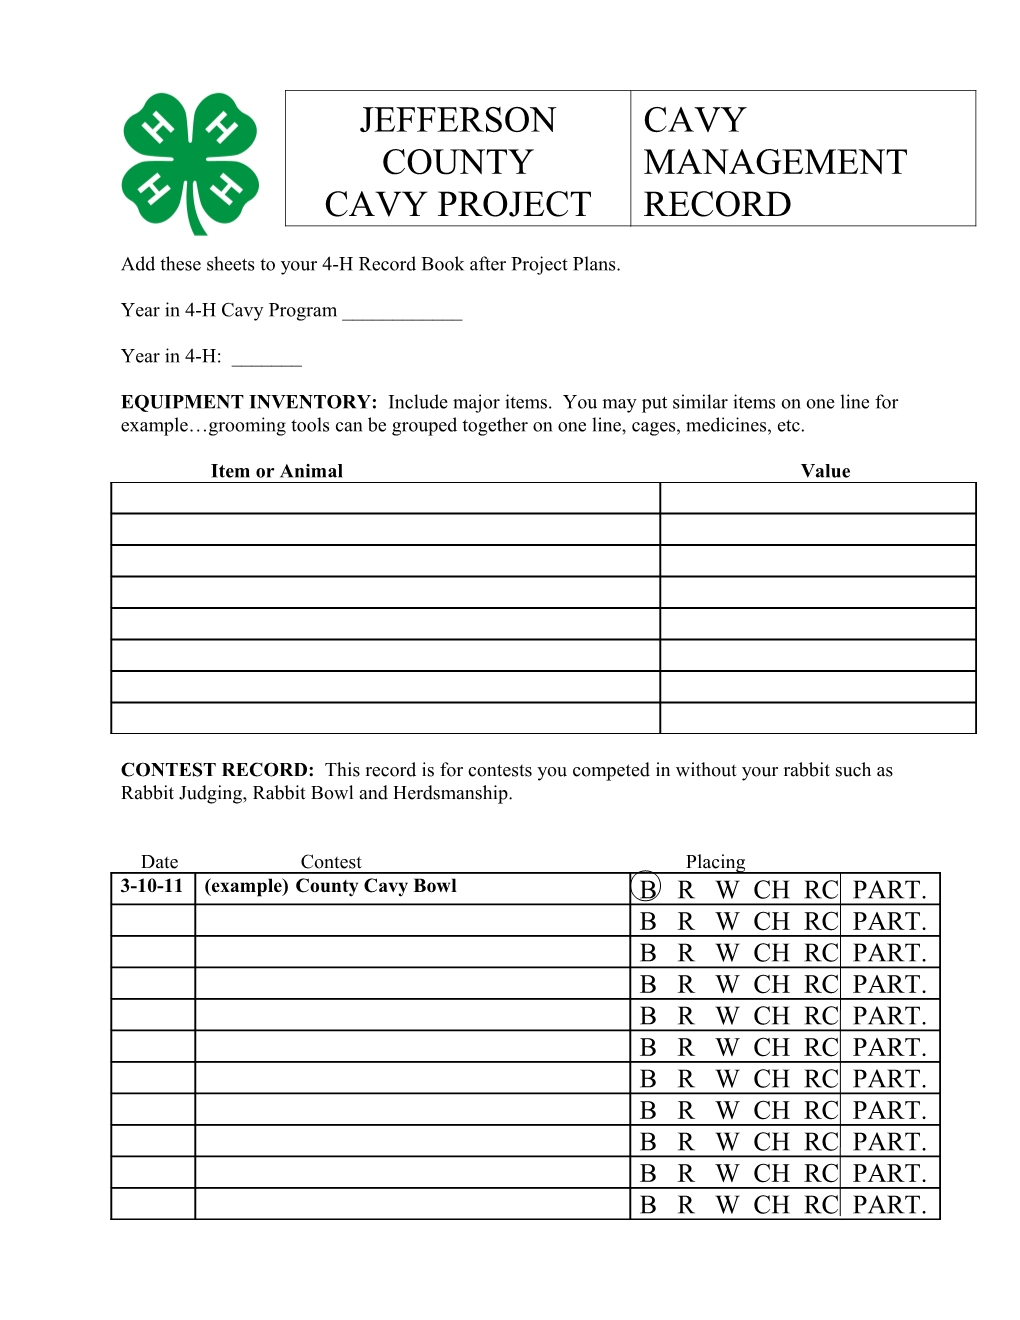 Add These Sheets to Your 4-H Record Book After Project Plans